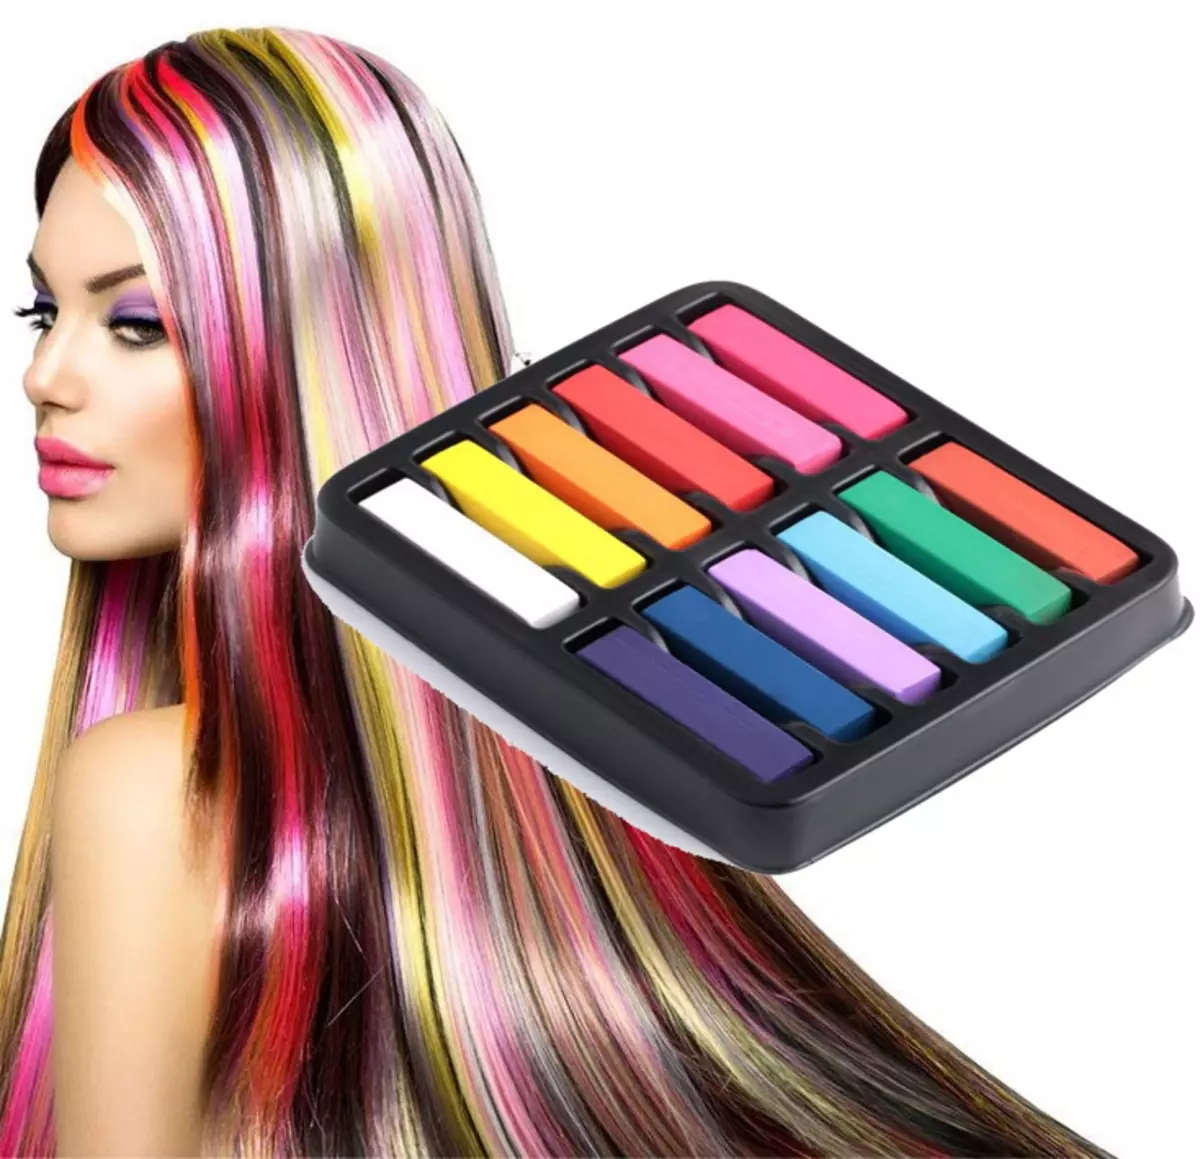 Crayons for coloring hair pros and cons of temporary staining. How to paint the strands of wax crayons at home? 5251_3